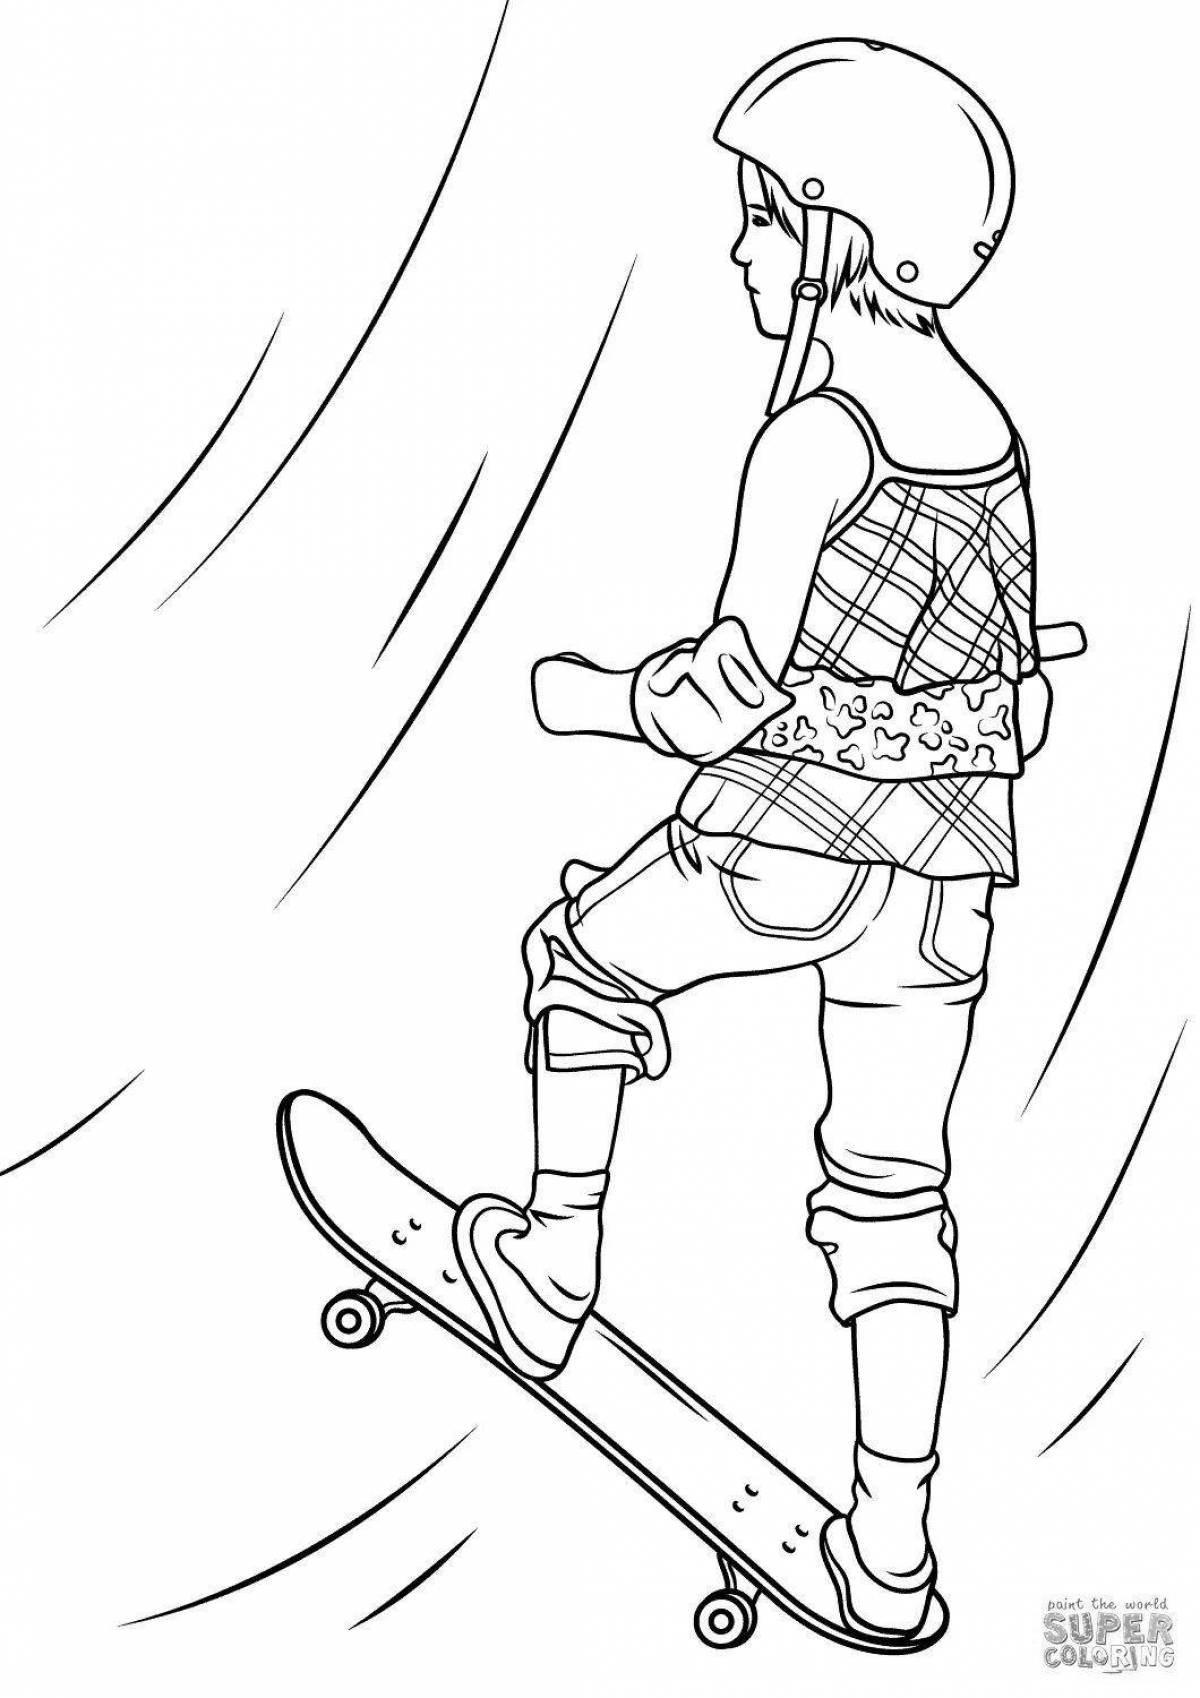 Courageous skateboarder coloring page